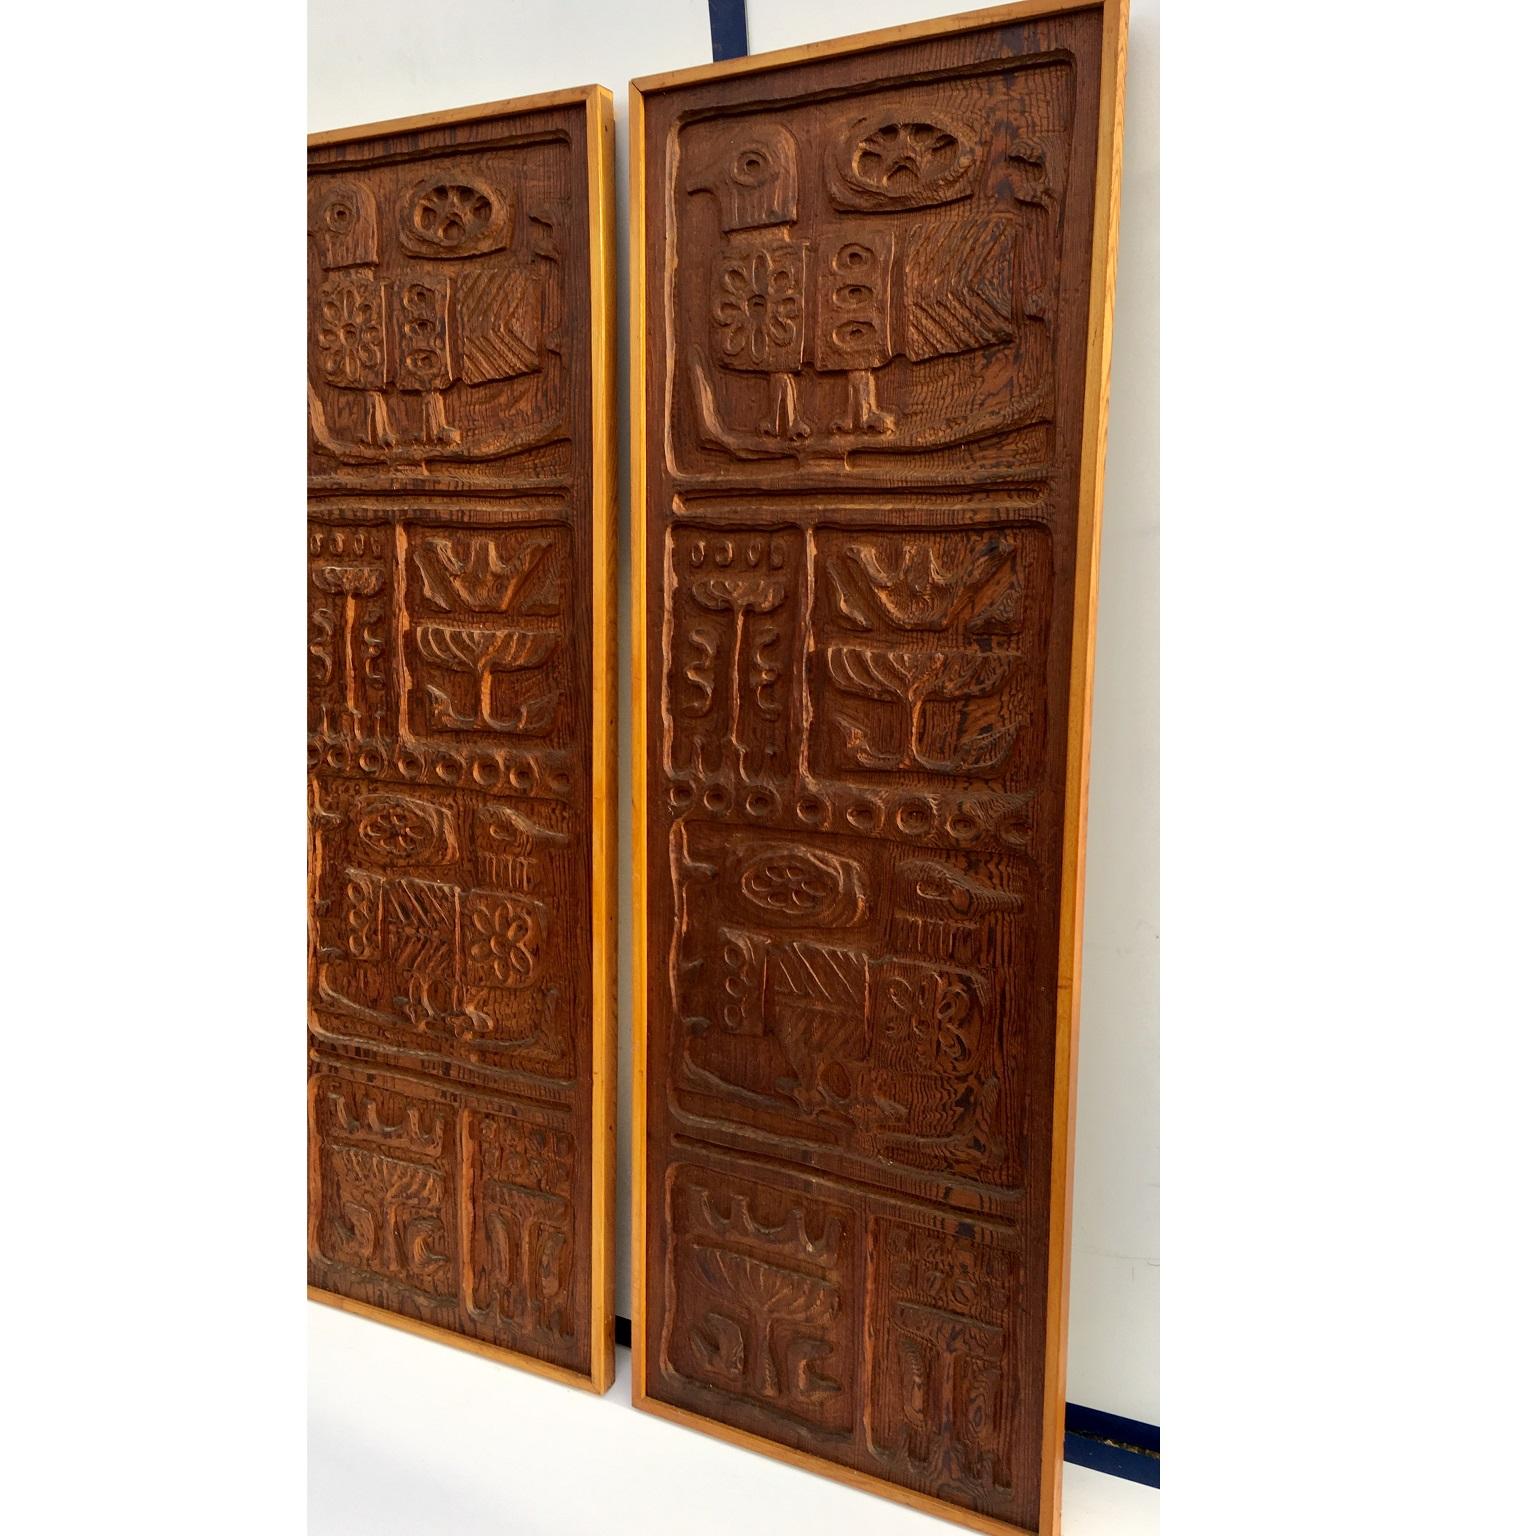 Rare pair of Evelyn Ackerman wood carved Panels for Panelcarve – Evie’s Birds
Extremely Rare pair of wood carved panels designed by Evelyn Ackerman for Panelcarve.
These panels would have been mostly used to decorate doors, and also used as wall